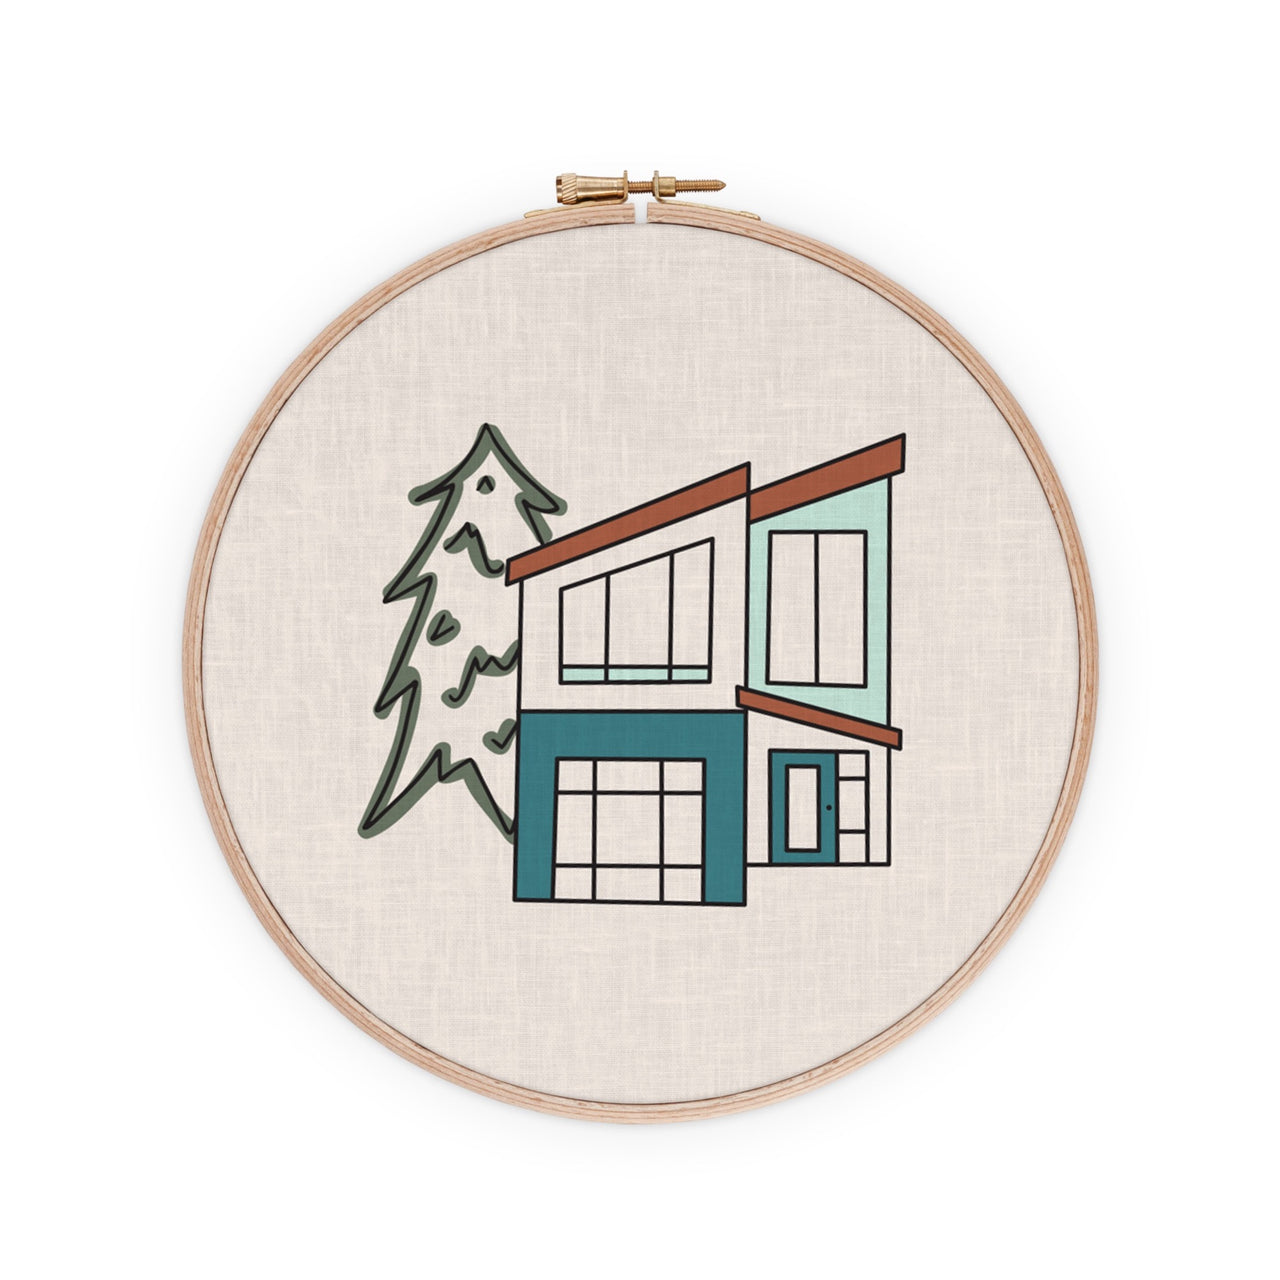 Modernist Mountain House Embroidery Pattern PDF Download Radiant Home Studio